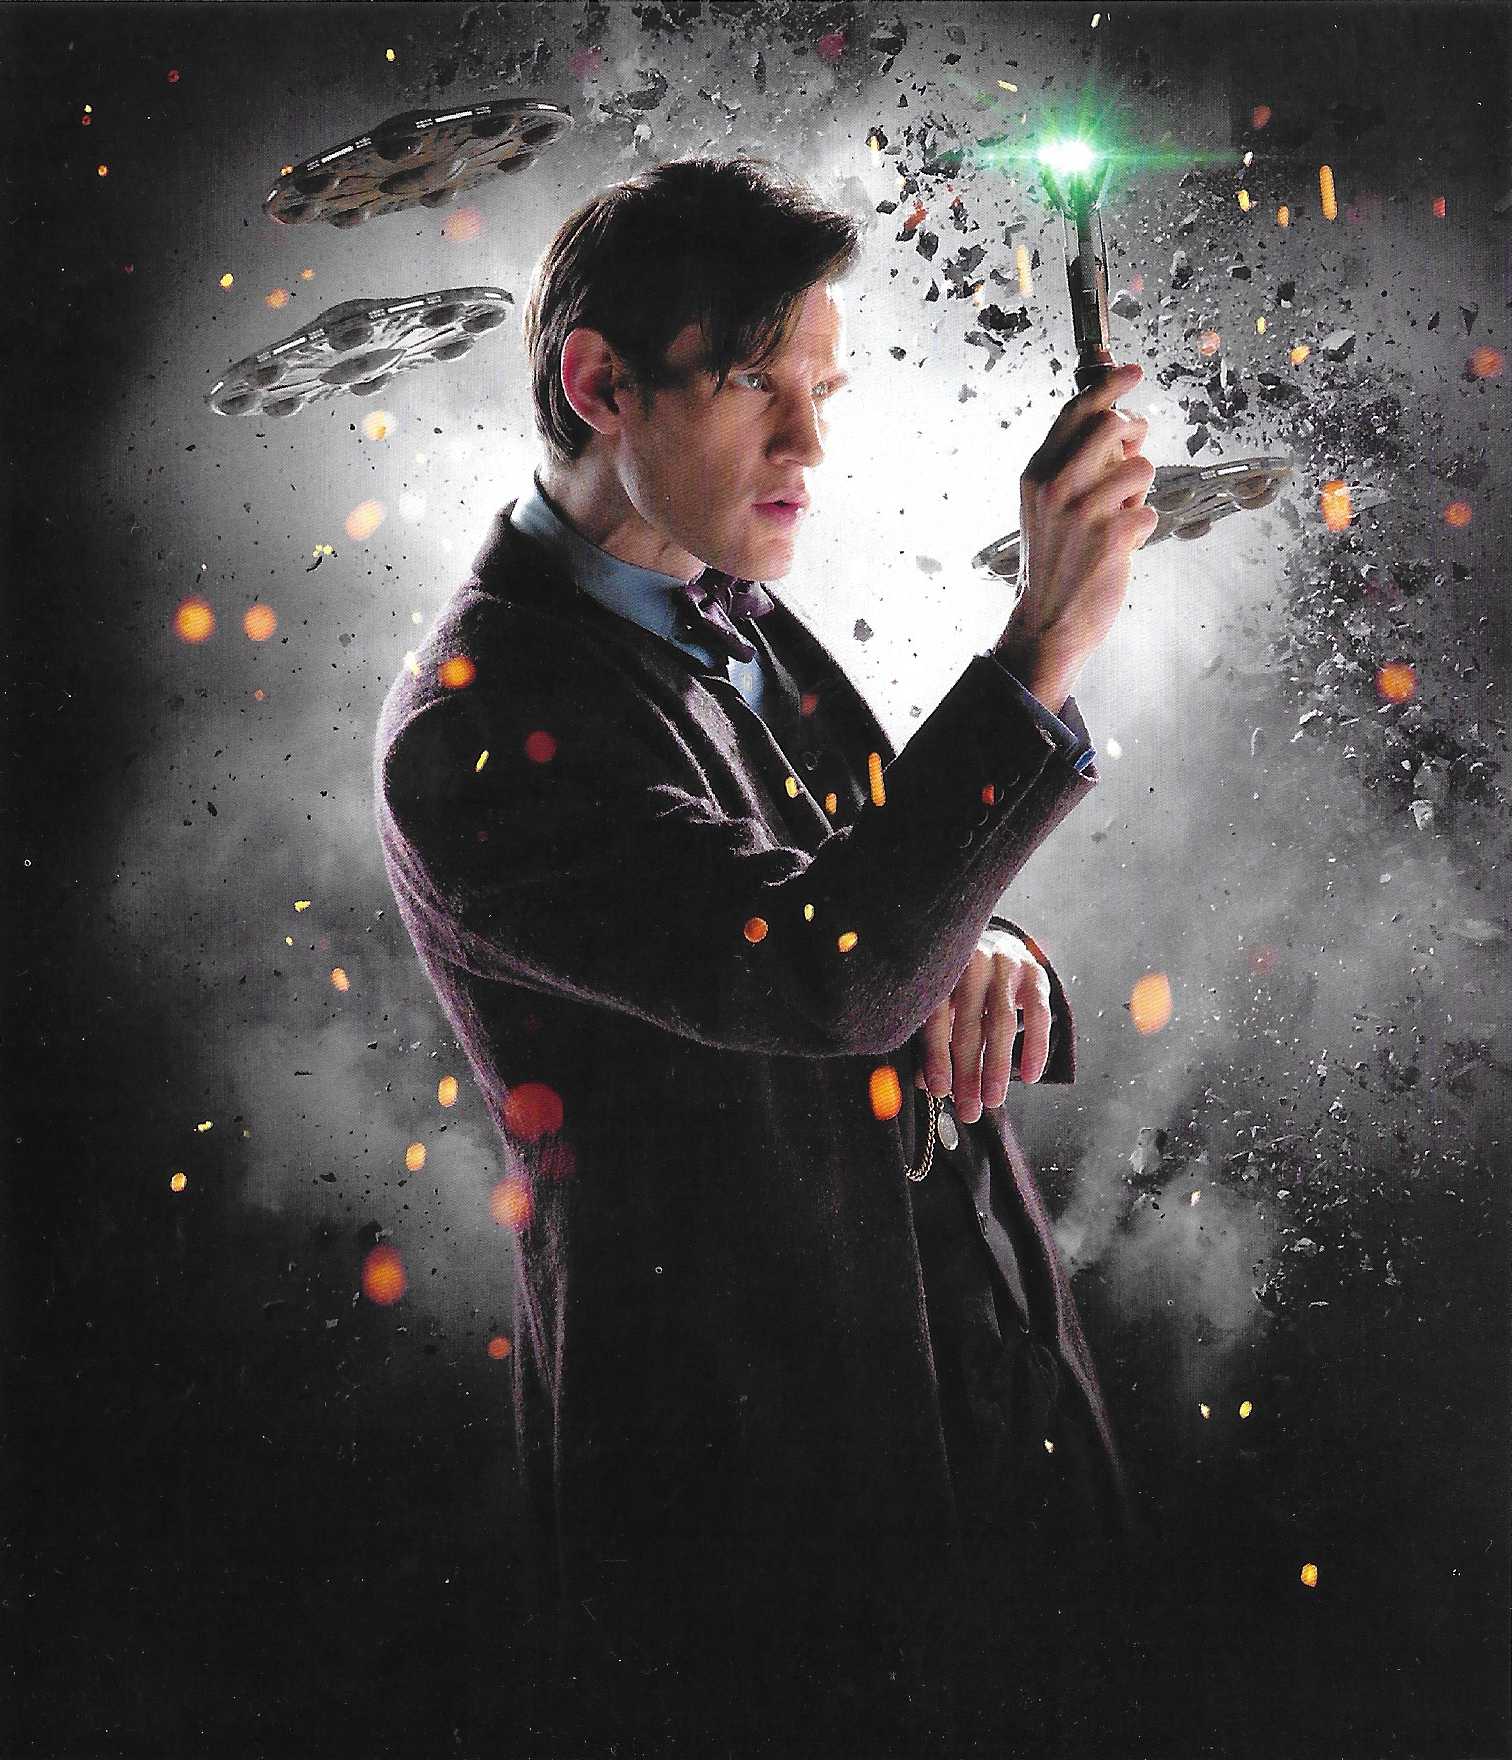 Picture of BBCBD 0271 01 Doctor Who - The name of the Doctor by artist Steven Moffat from the BBC blu-rays - Records and Tapes library